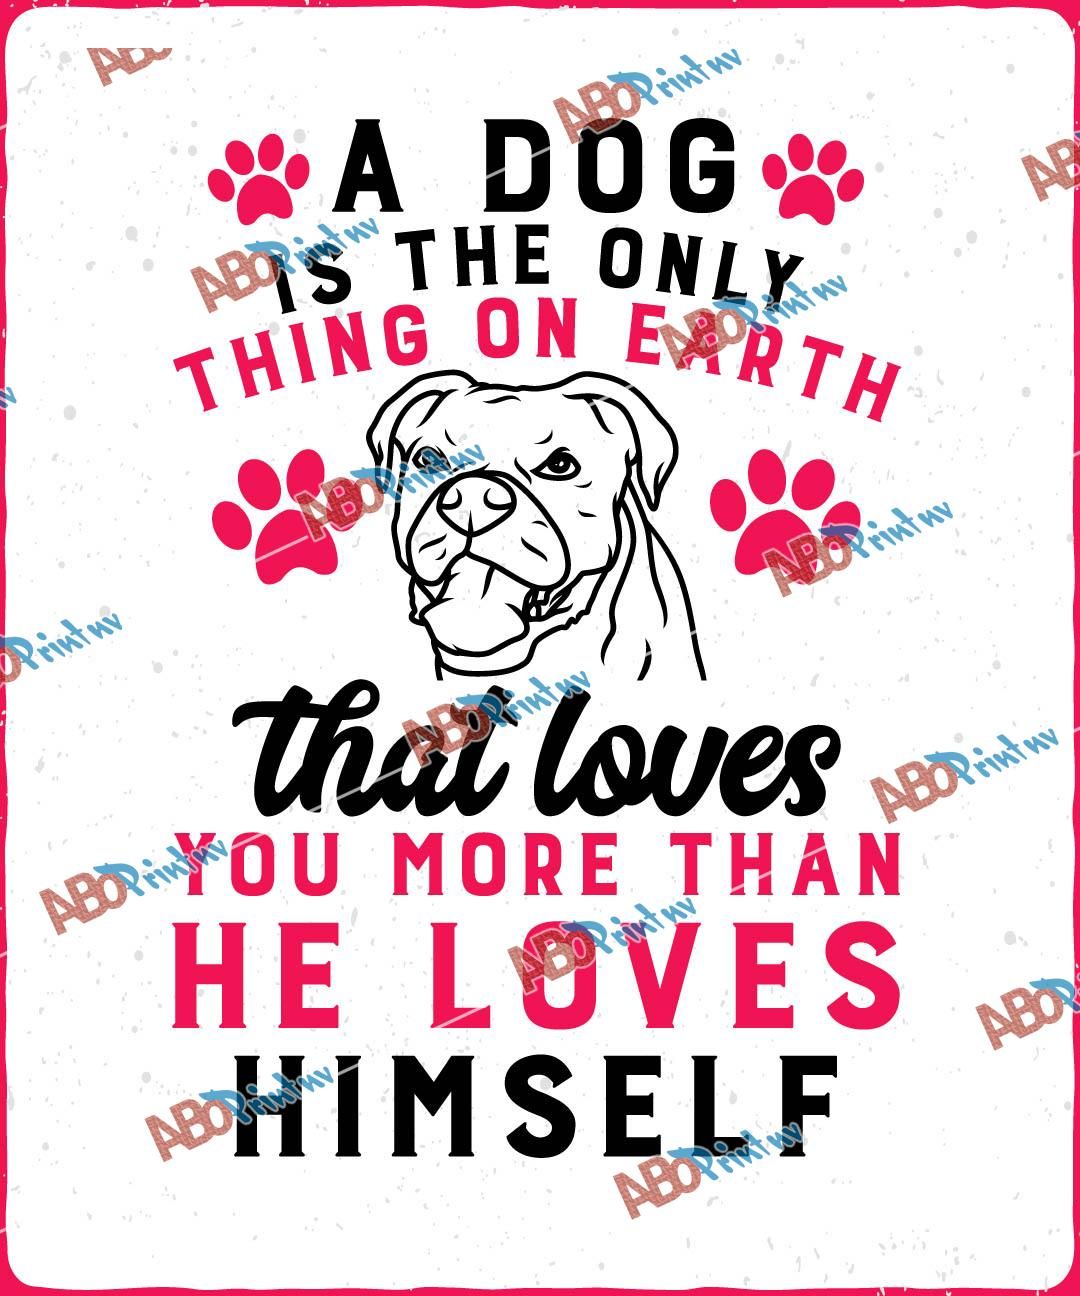 A dog is the only thing on earth that loves you more than he loves himself.jpg